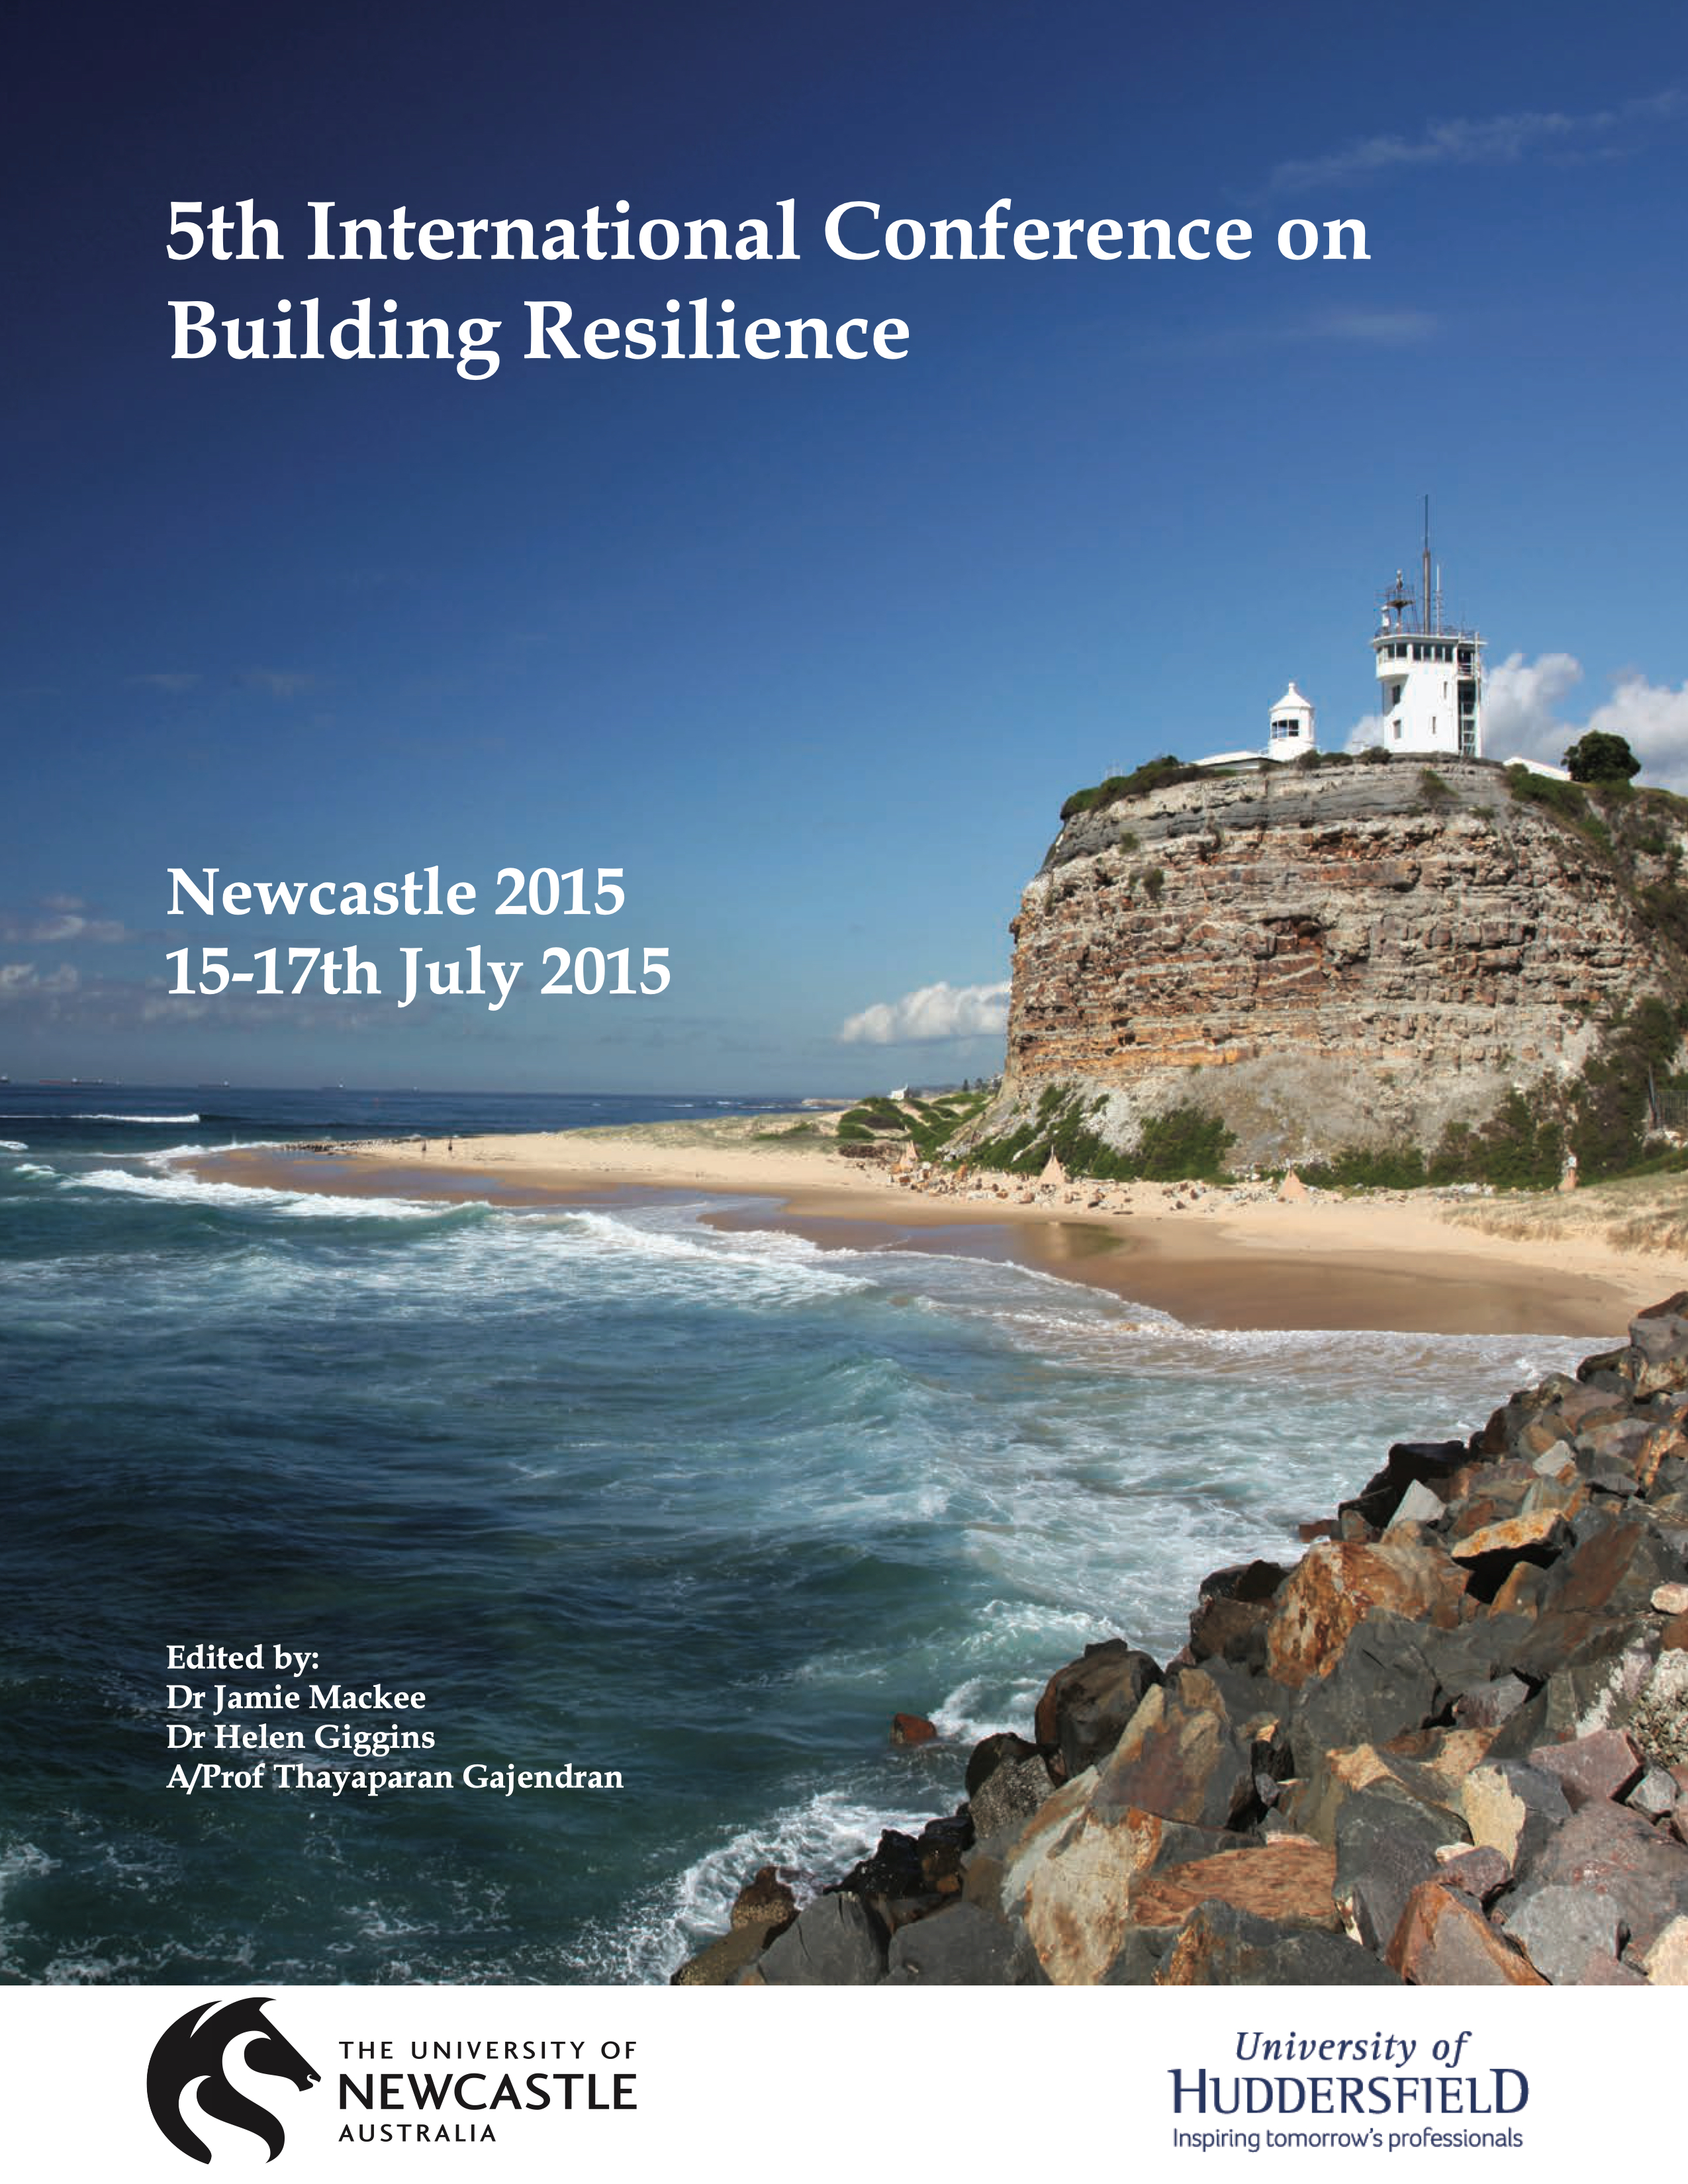 5th International Conference on Building Resilience